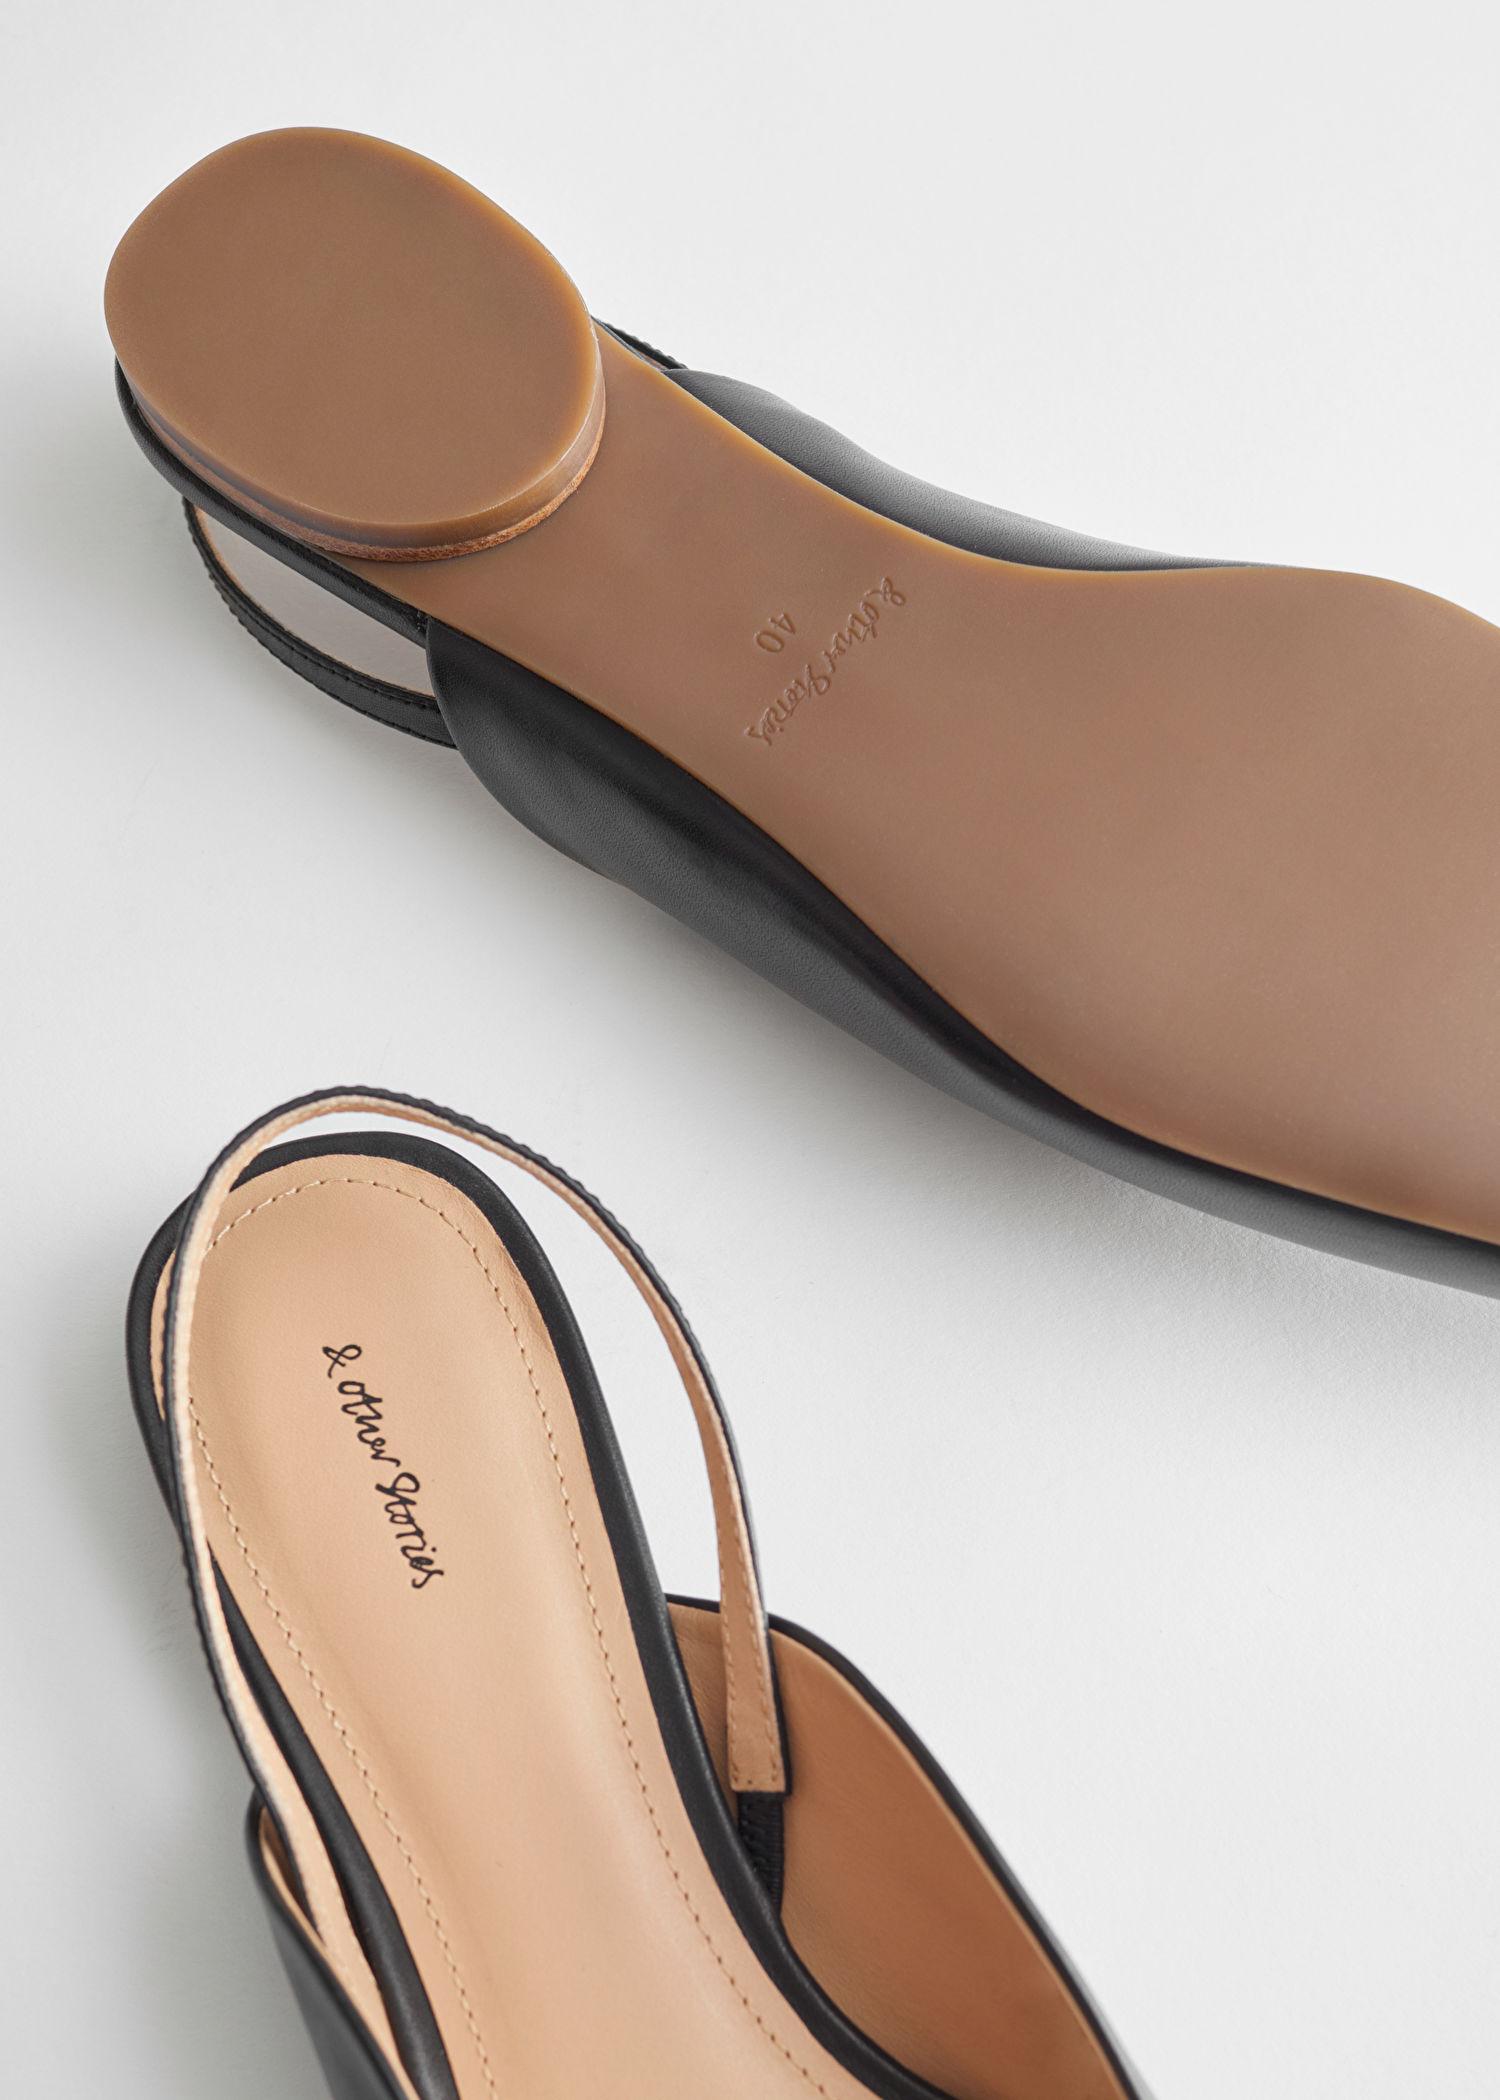 & Other Stories Leather Square Toe Ballerina Flats in Black | Lyst Canada